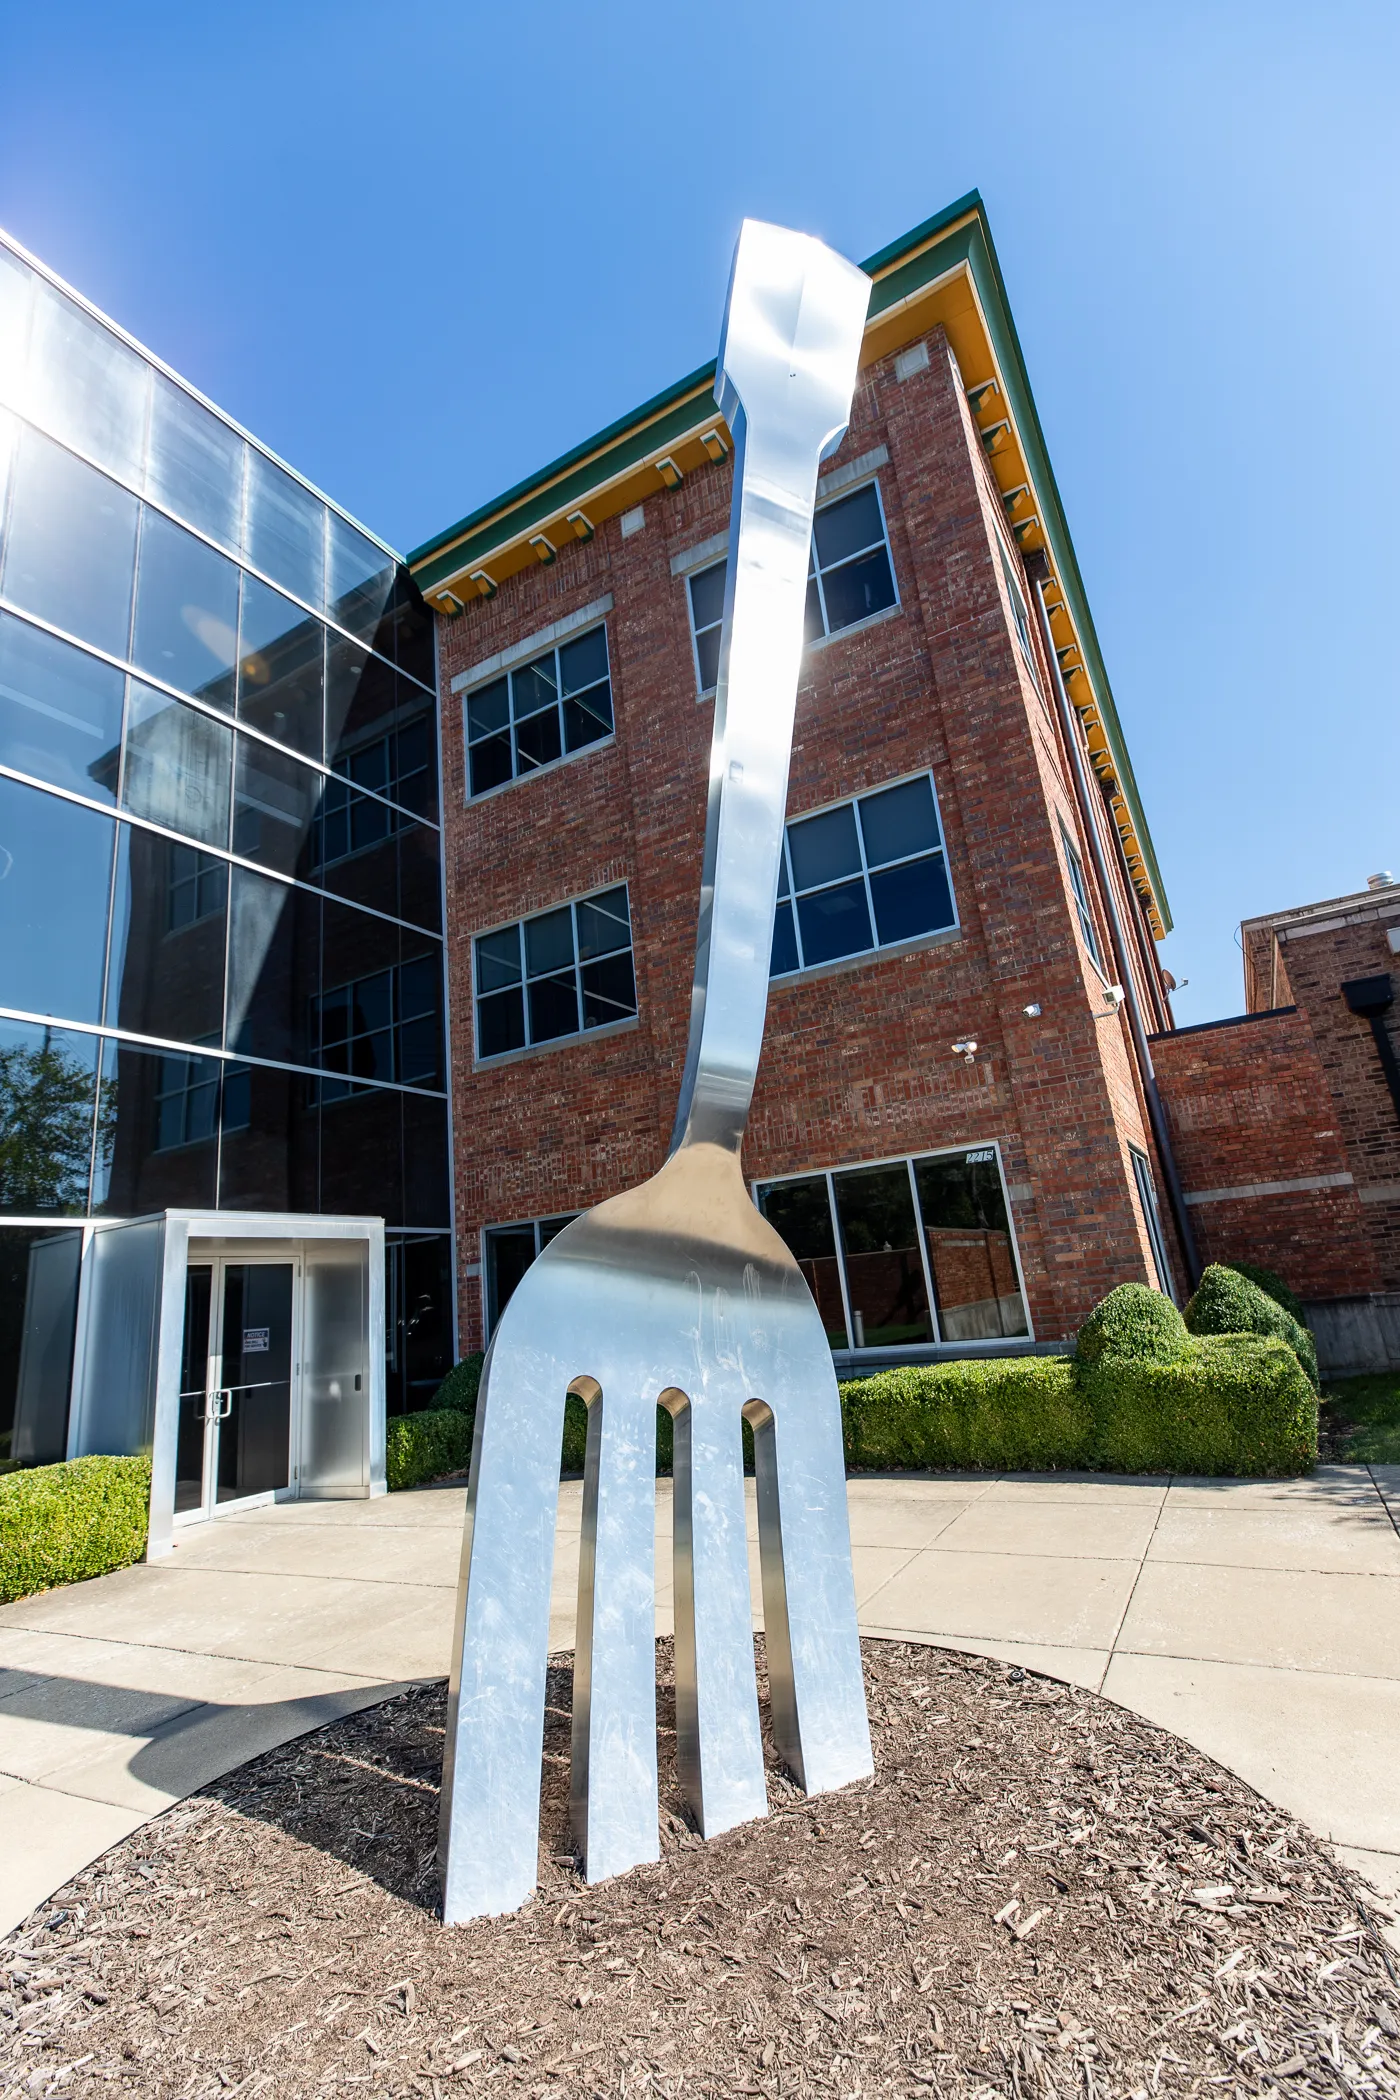 World's Largest Fork in Springfield, Missouri - Route 66 Roadside Attraction